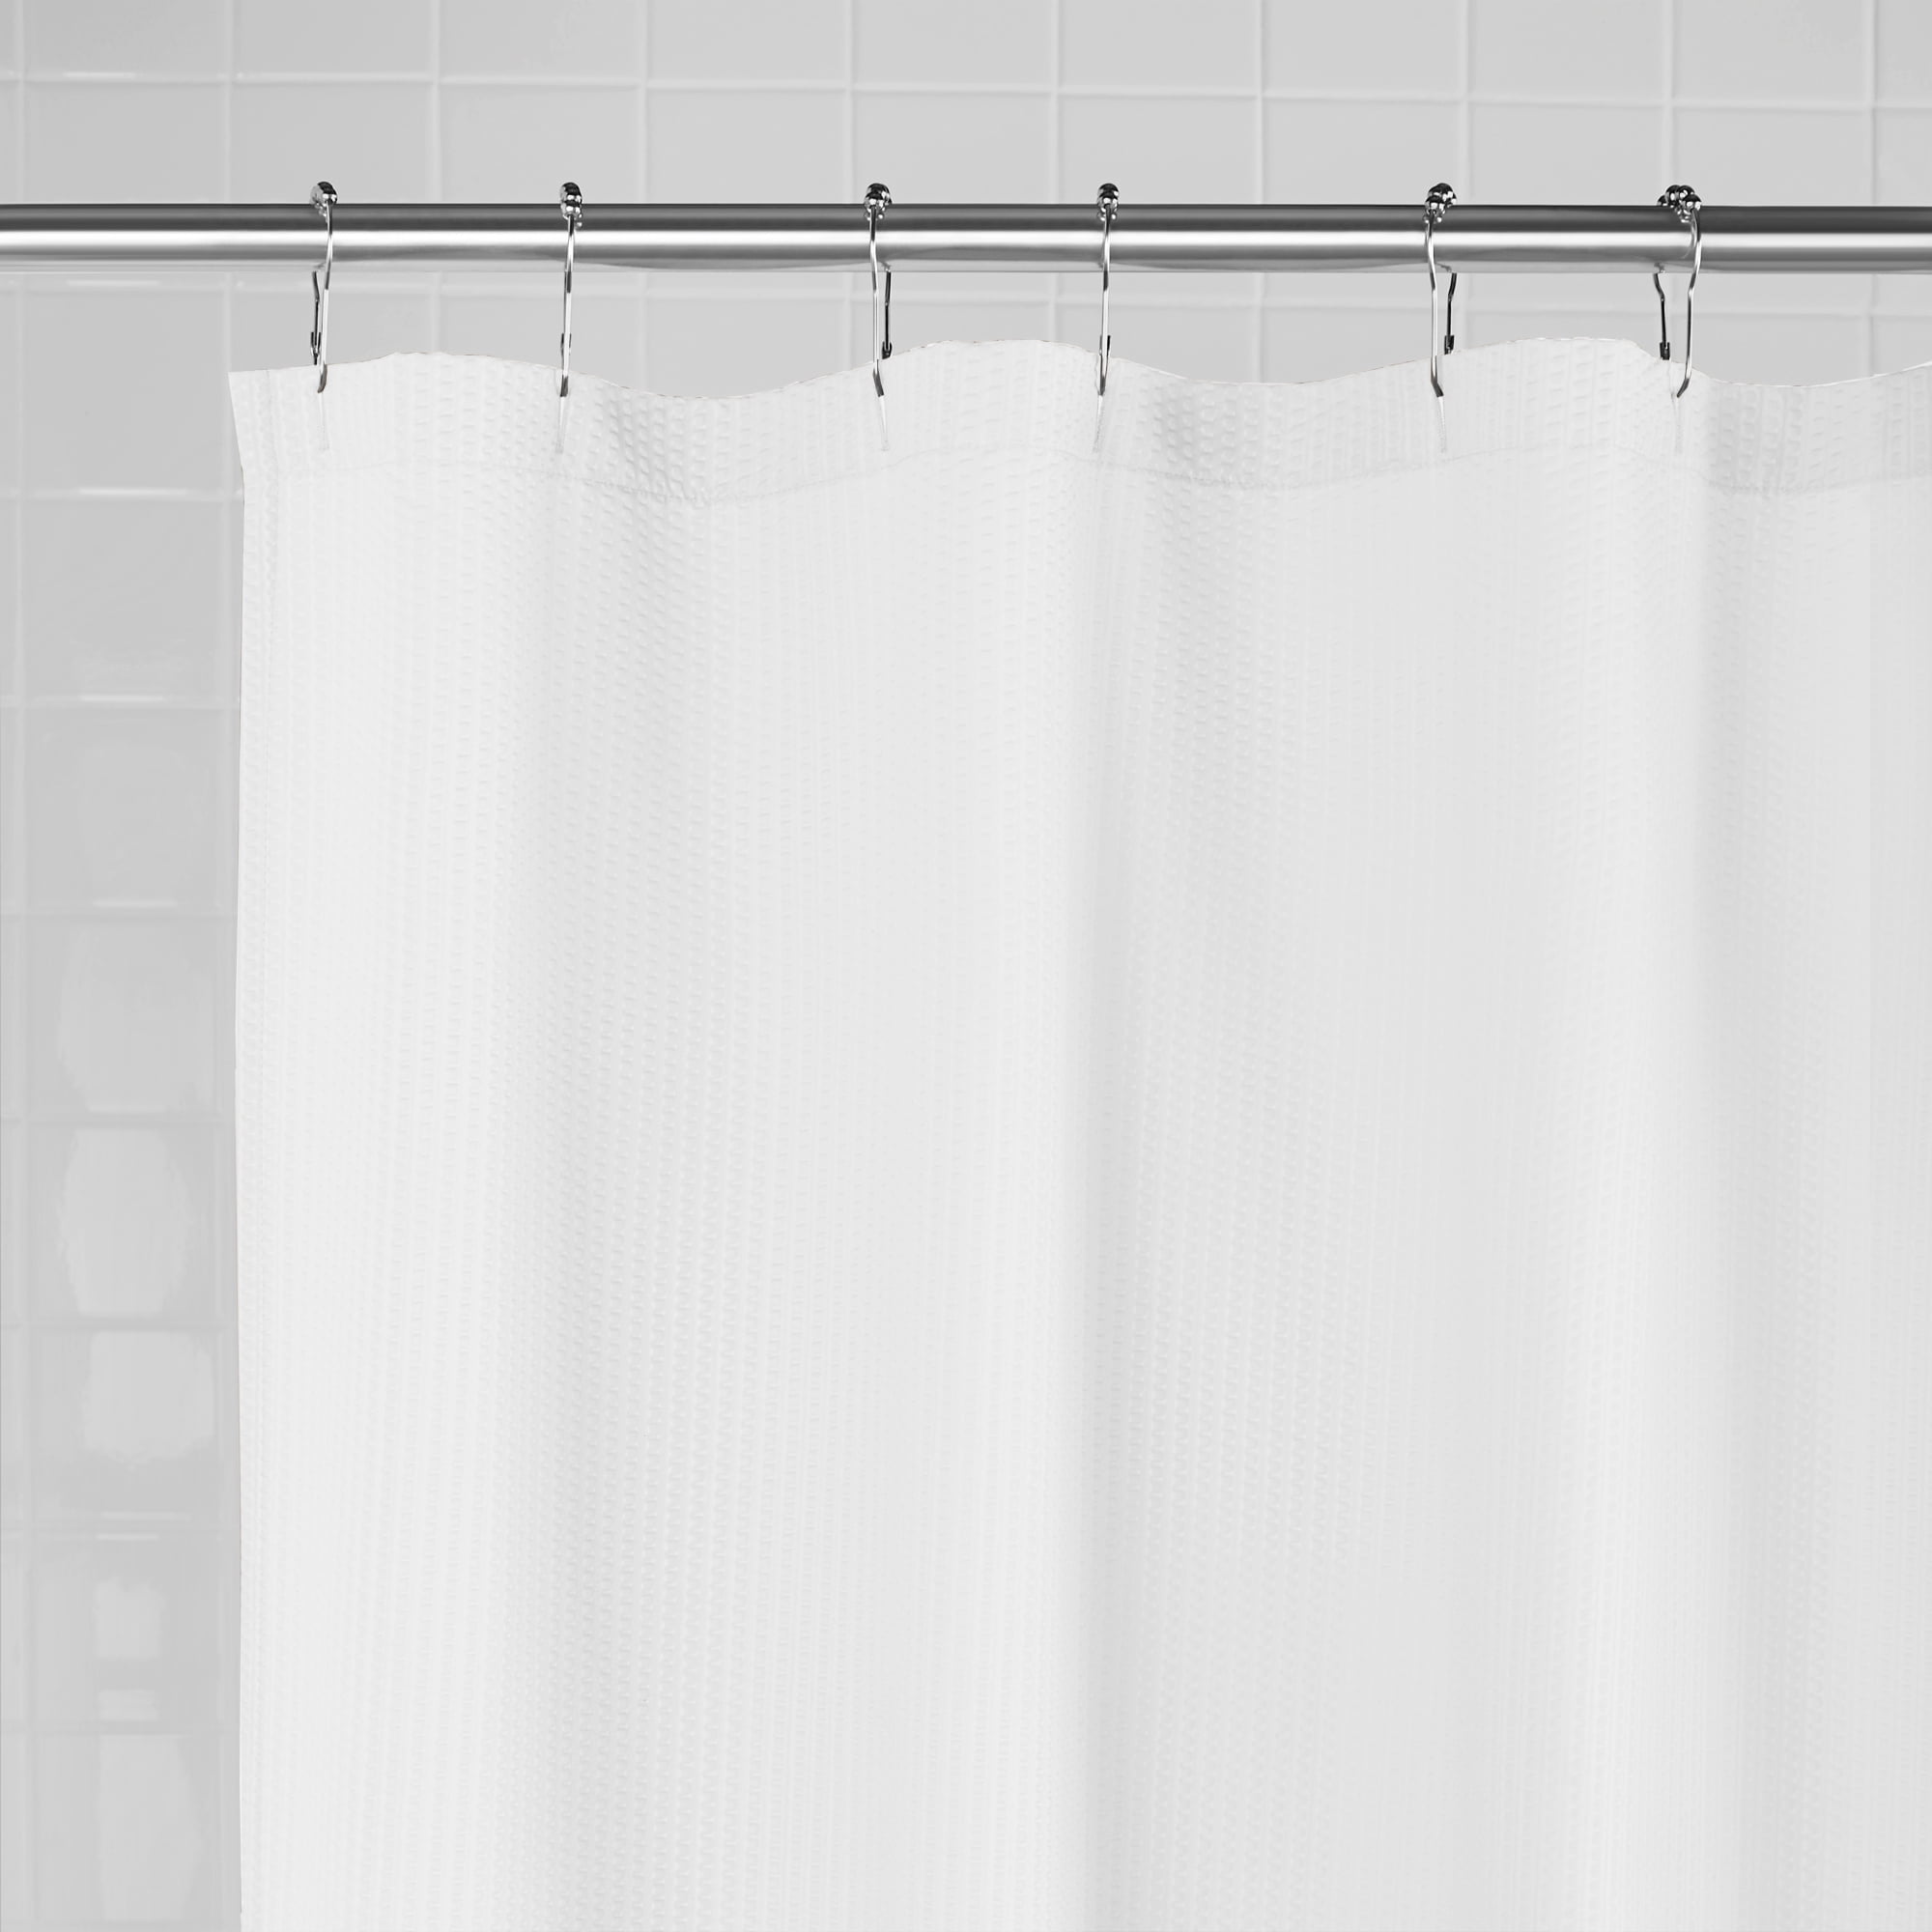 Mainstays Water Repellent Textured, Mrs Awesome Water Repellent Fabric Shower Curtain Liner